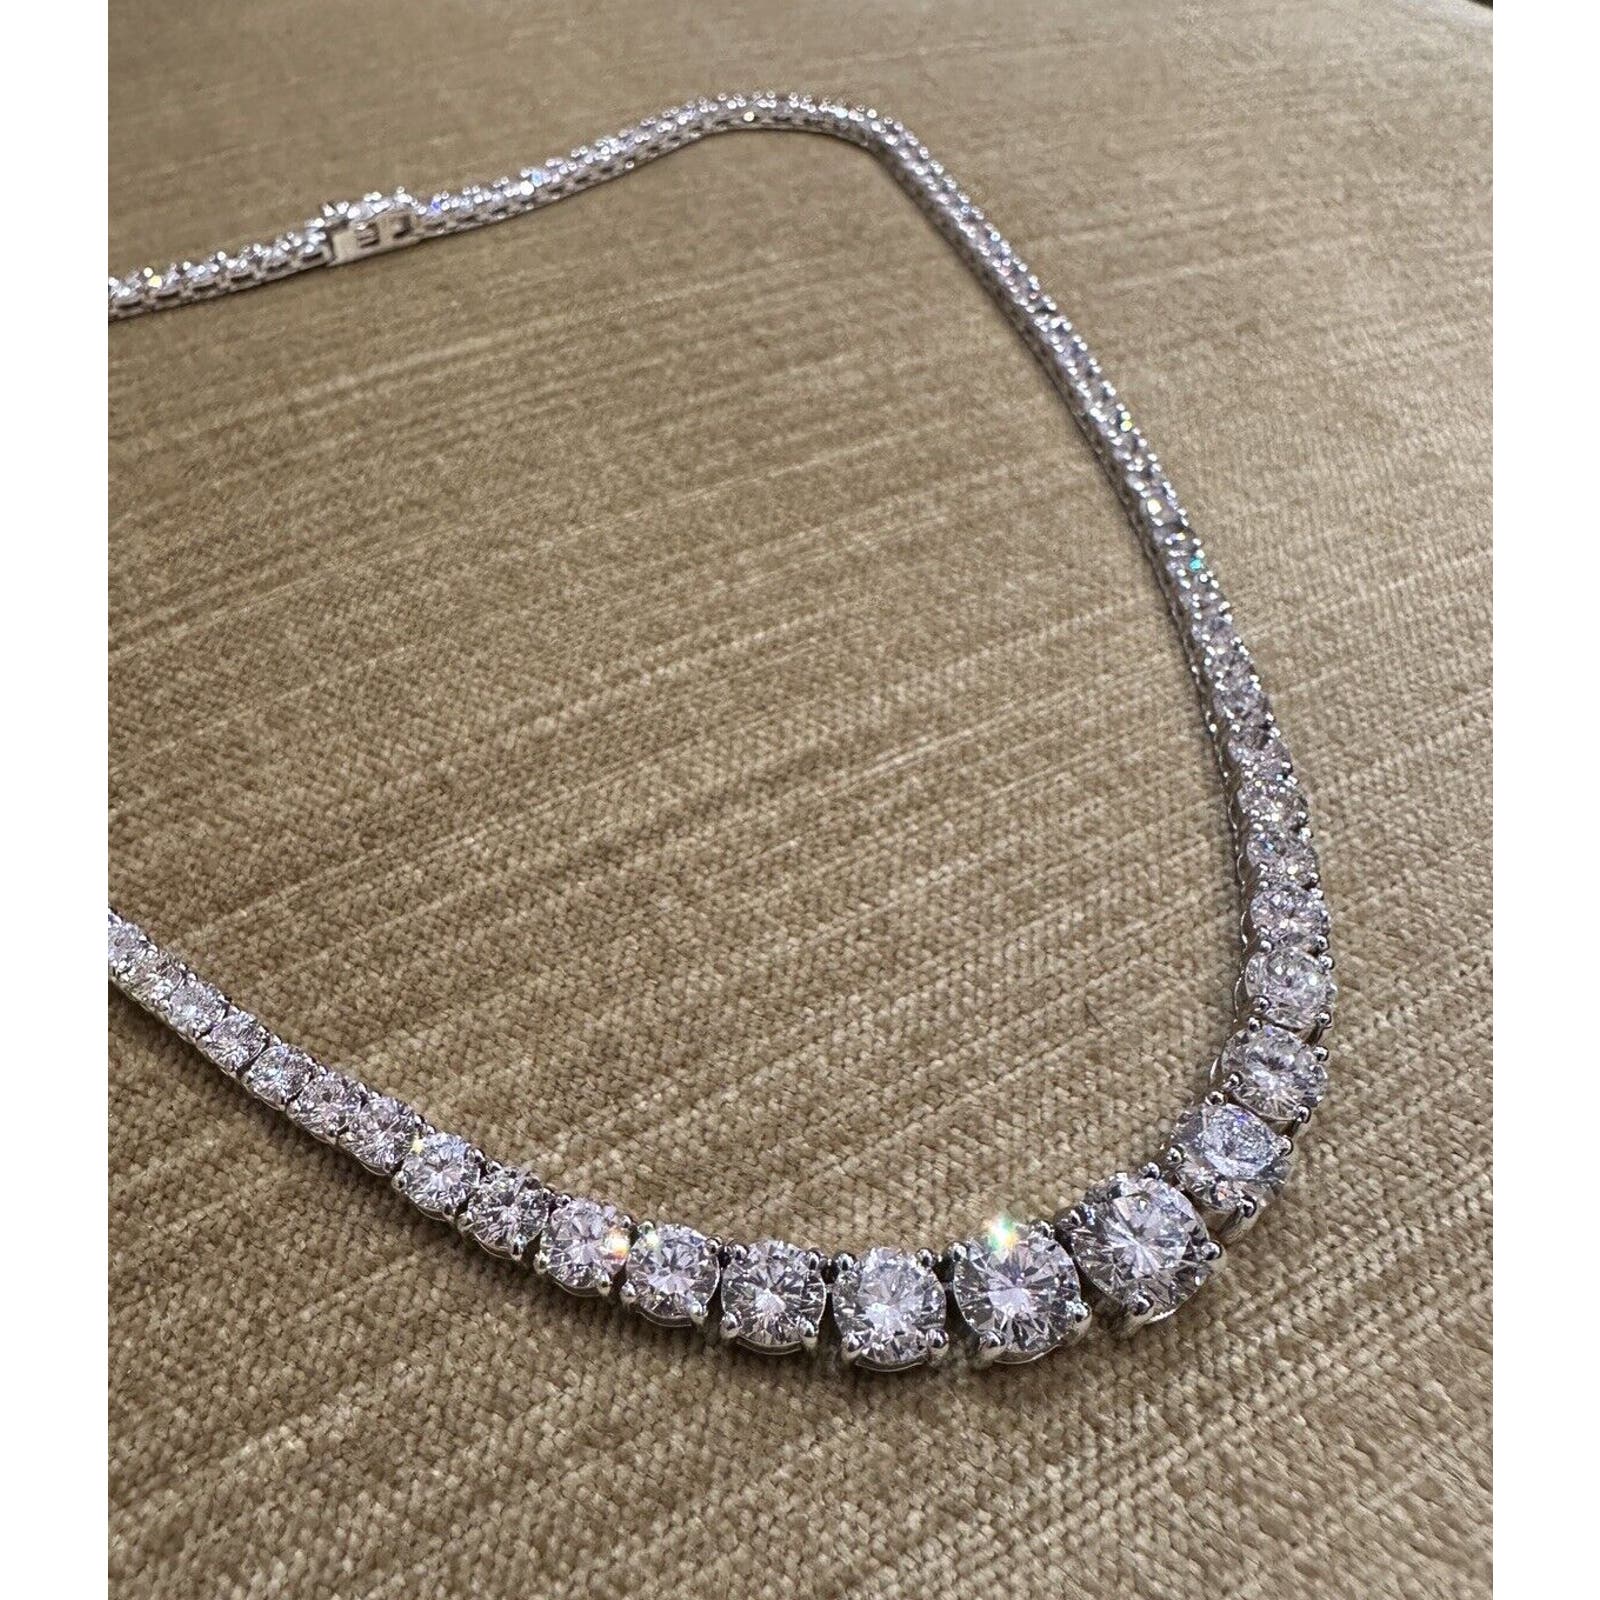 Diamond Riviera Necklace 24.12 cttw in 4-prong 18k White Gold setting - HMC200BE